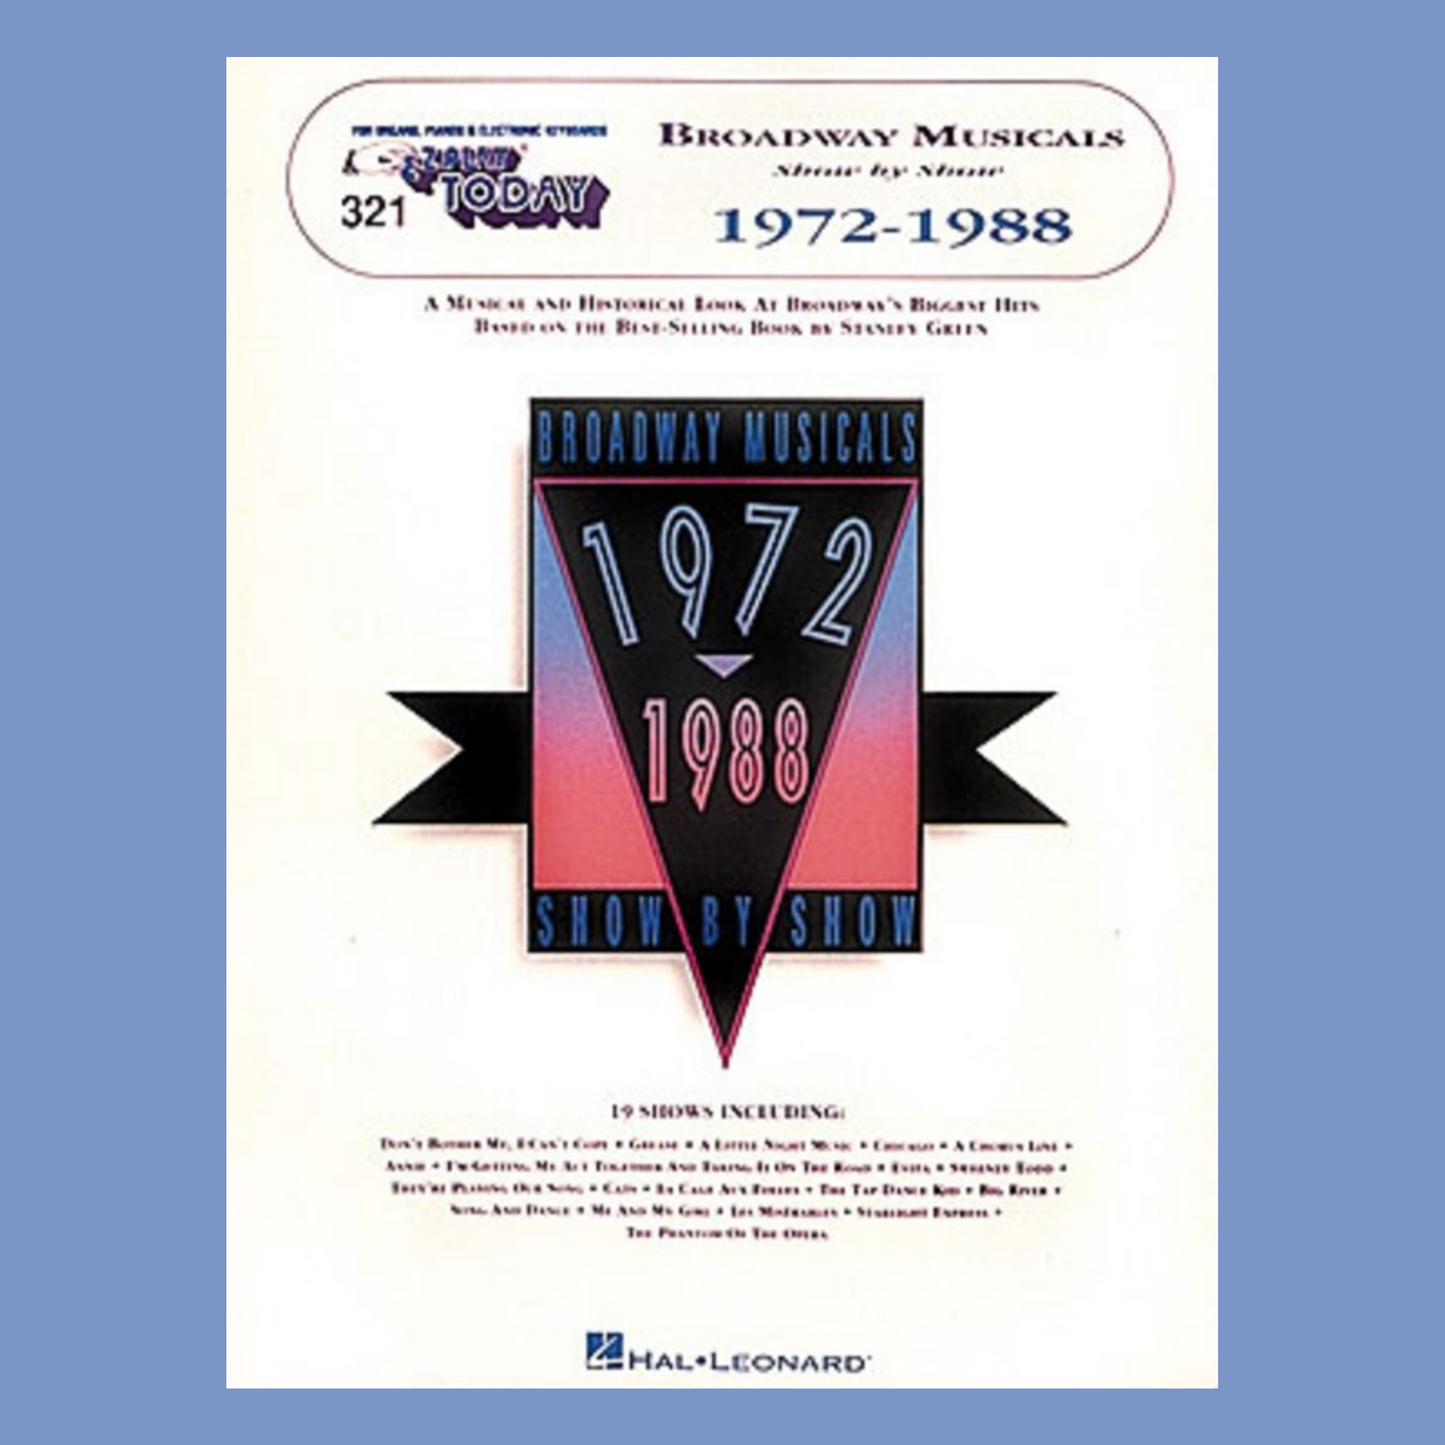 Broadway Musicals Show by Show (1972-1988) - EZ Play Piano Volume 321 Book